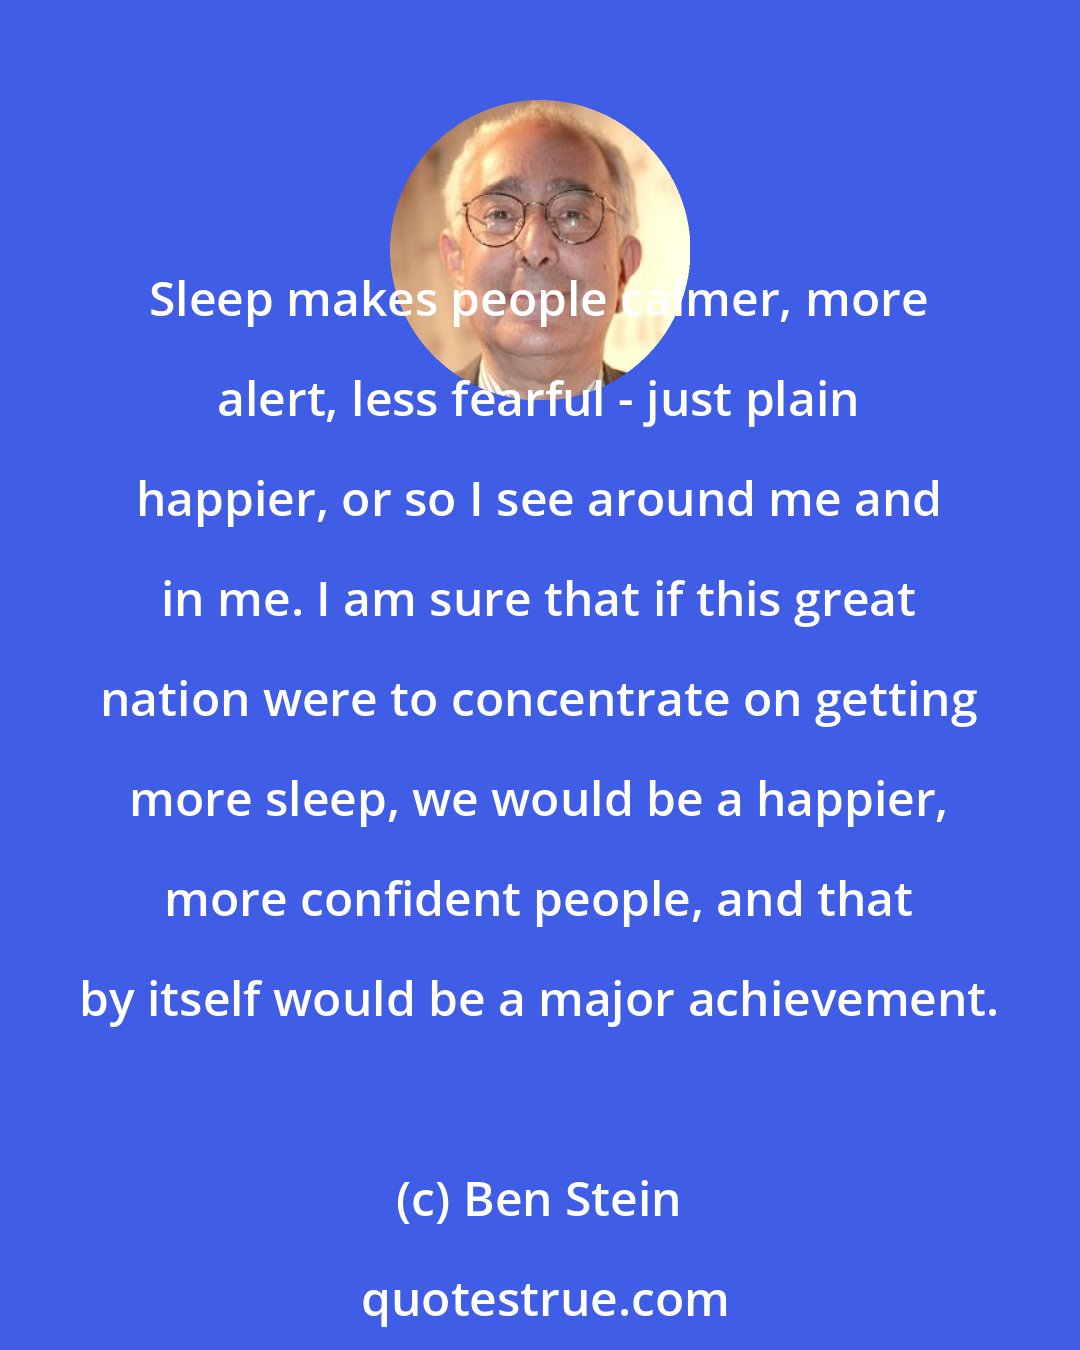 Ben Stein: Sleep makes people calmer, more alert, less fearful - just plain happier, or so I see around me and in me. I am sure that if this great nation were to concentrate on getting more sleep, we would be a happier, more confident people, and that by itself would be a major achievement.